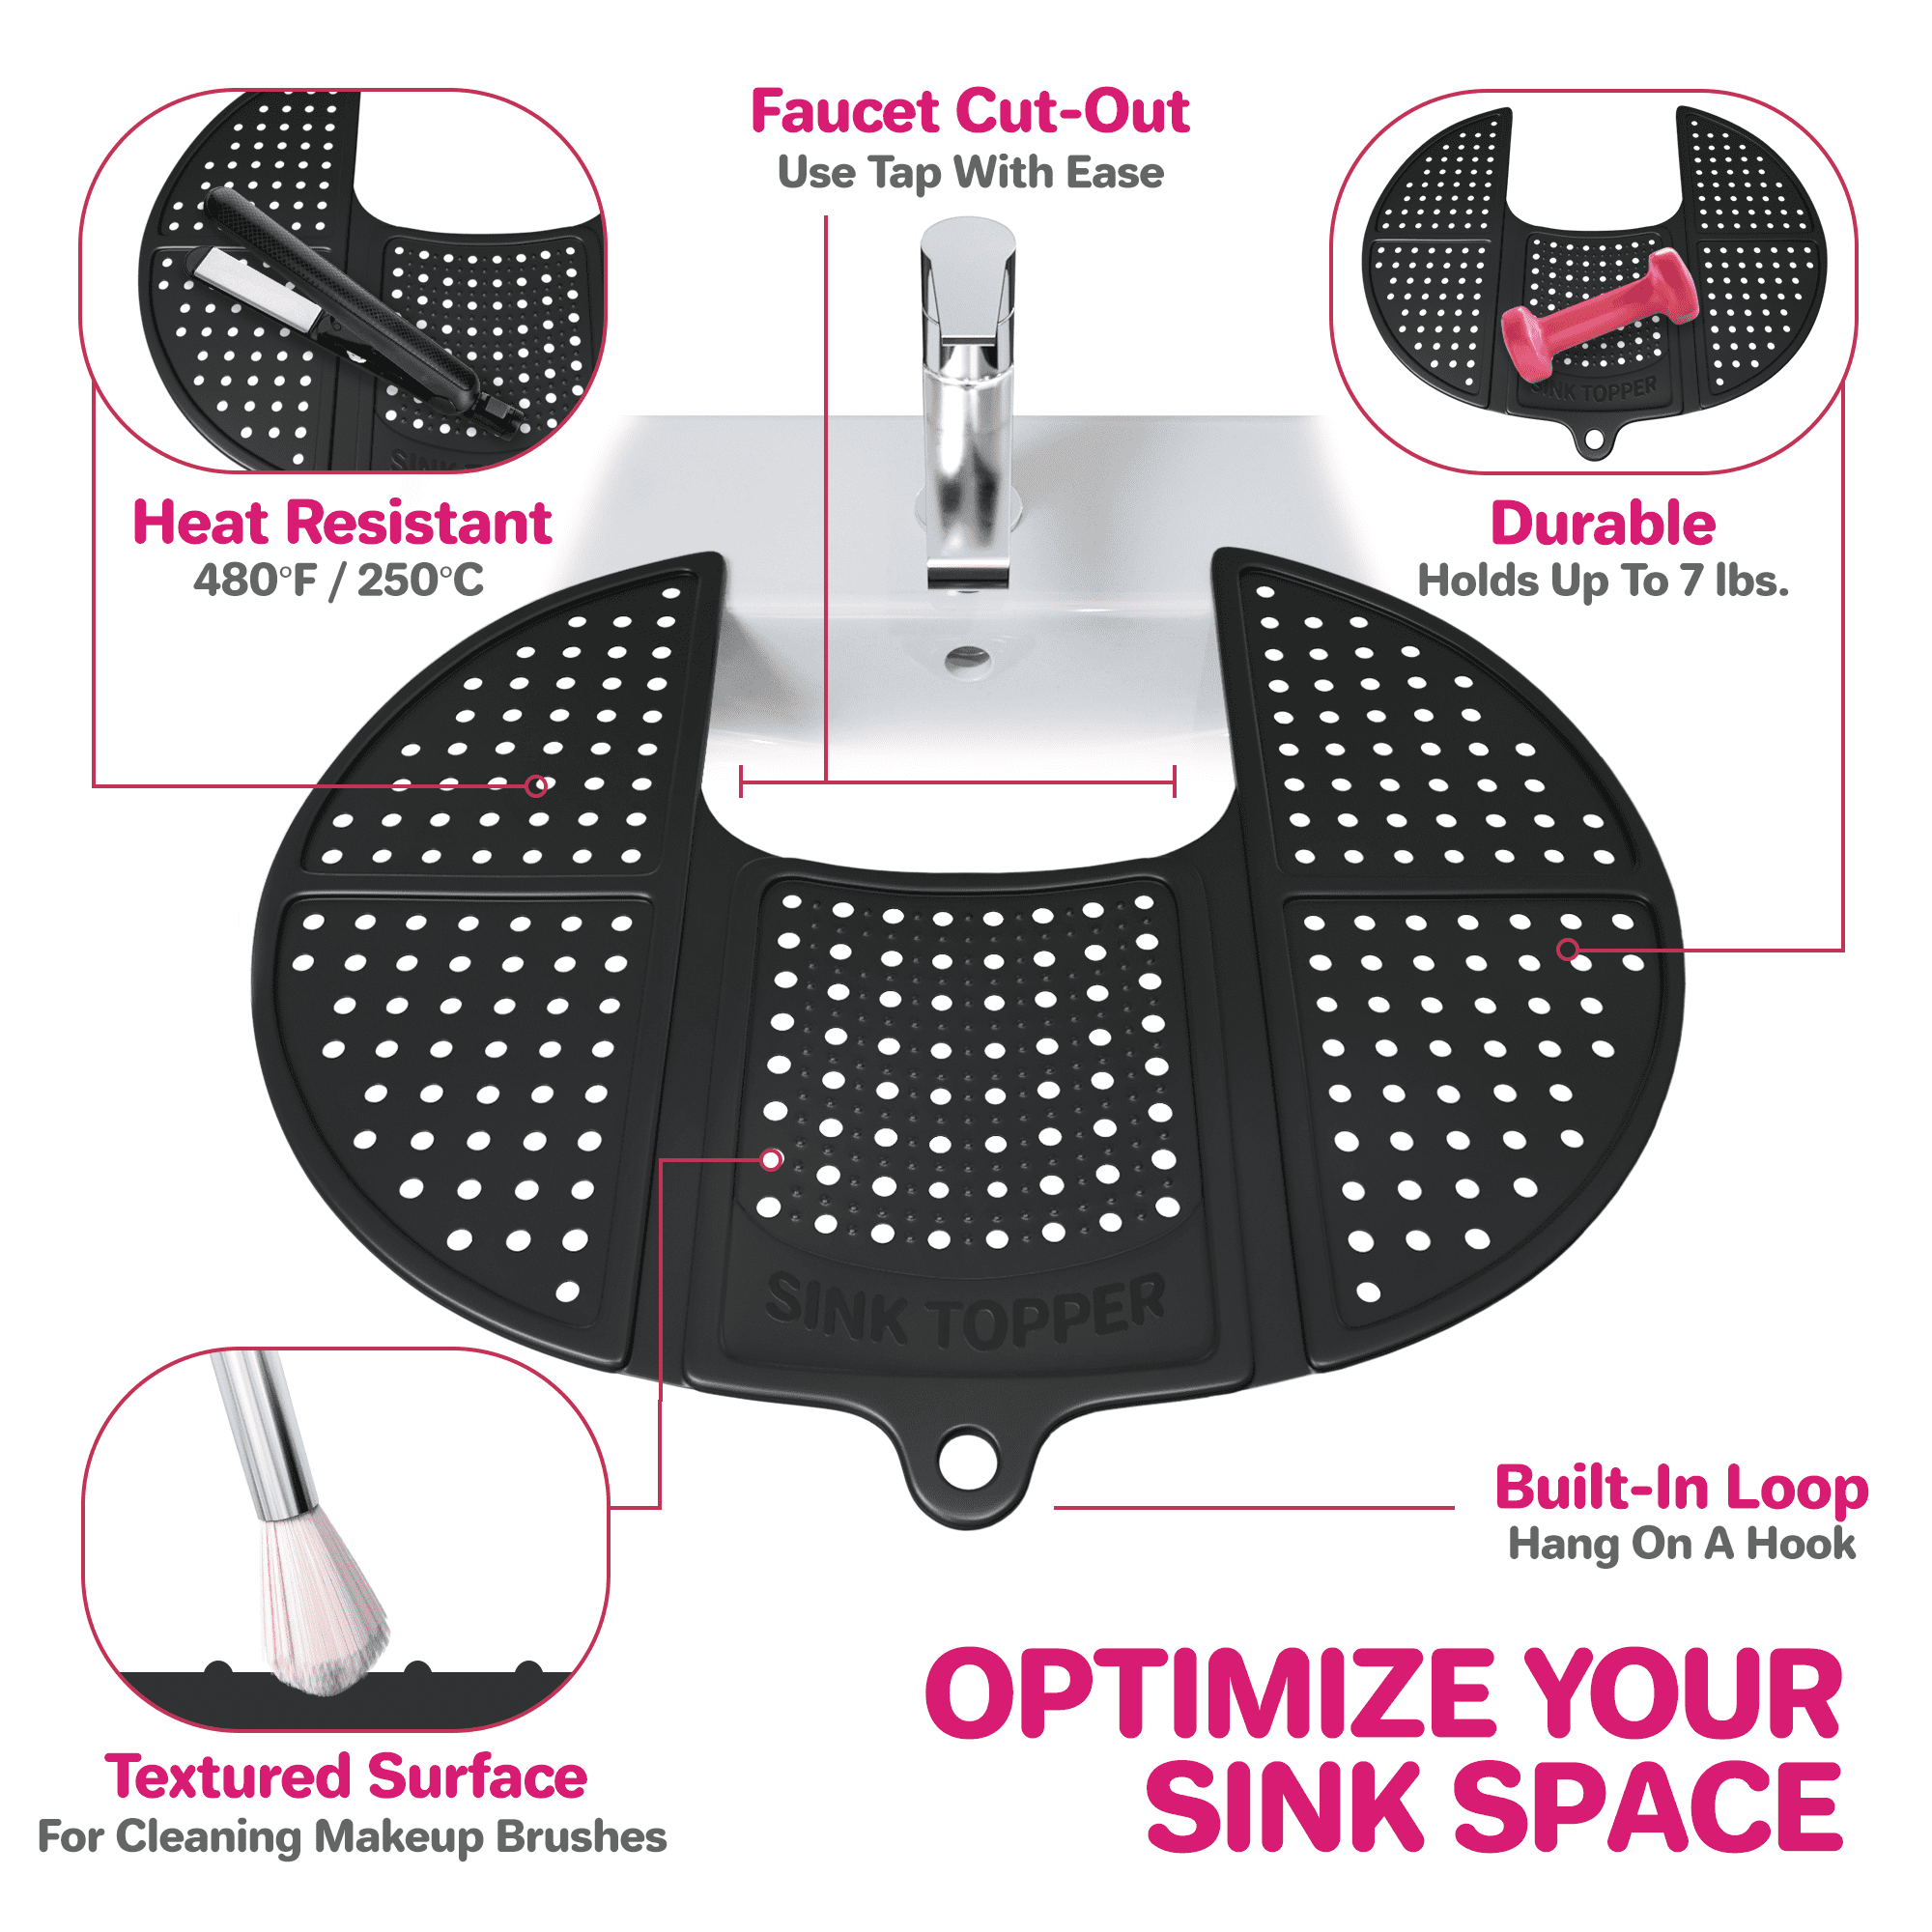 The Matte - Make Up Organizer Space Saver turns Bathroom Sink into a Beauty  Counter in an Instant (Standard, Black)